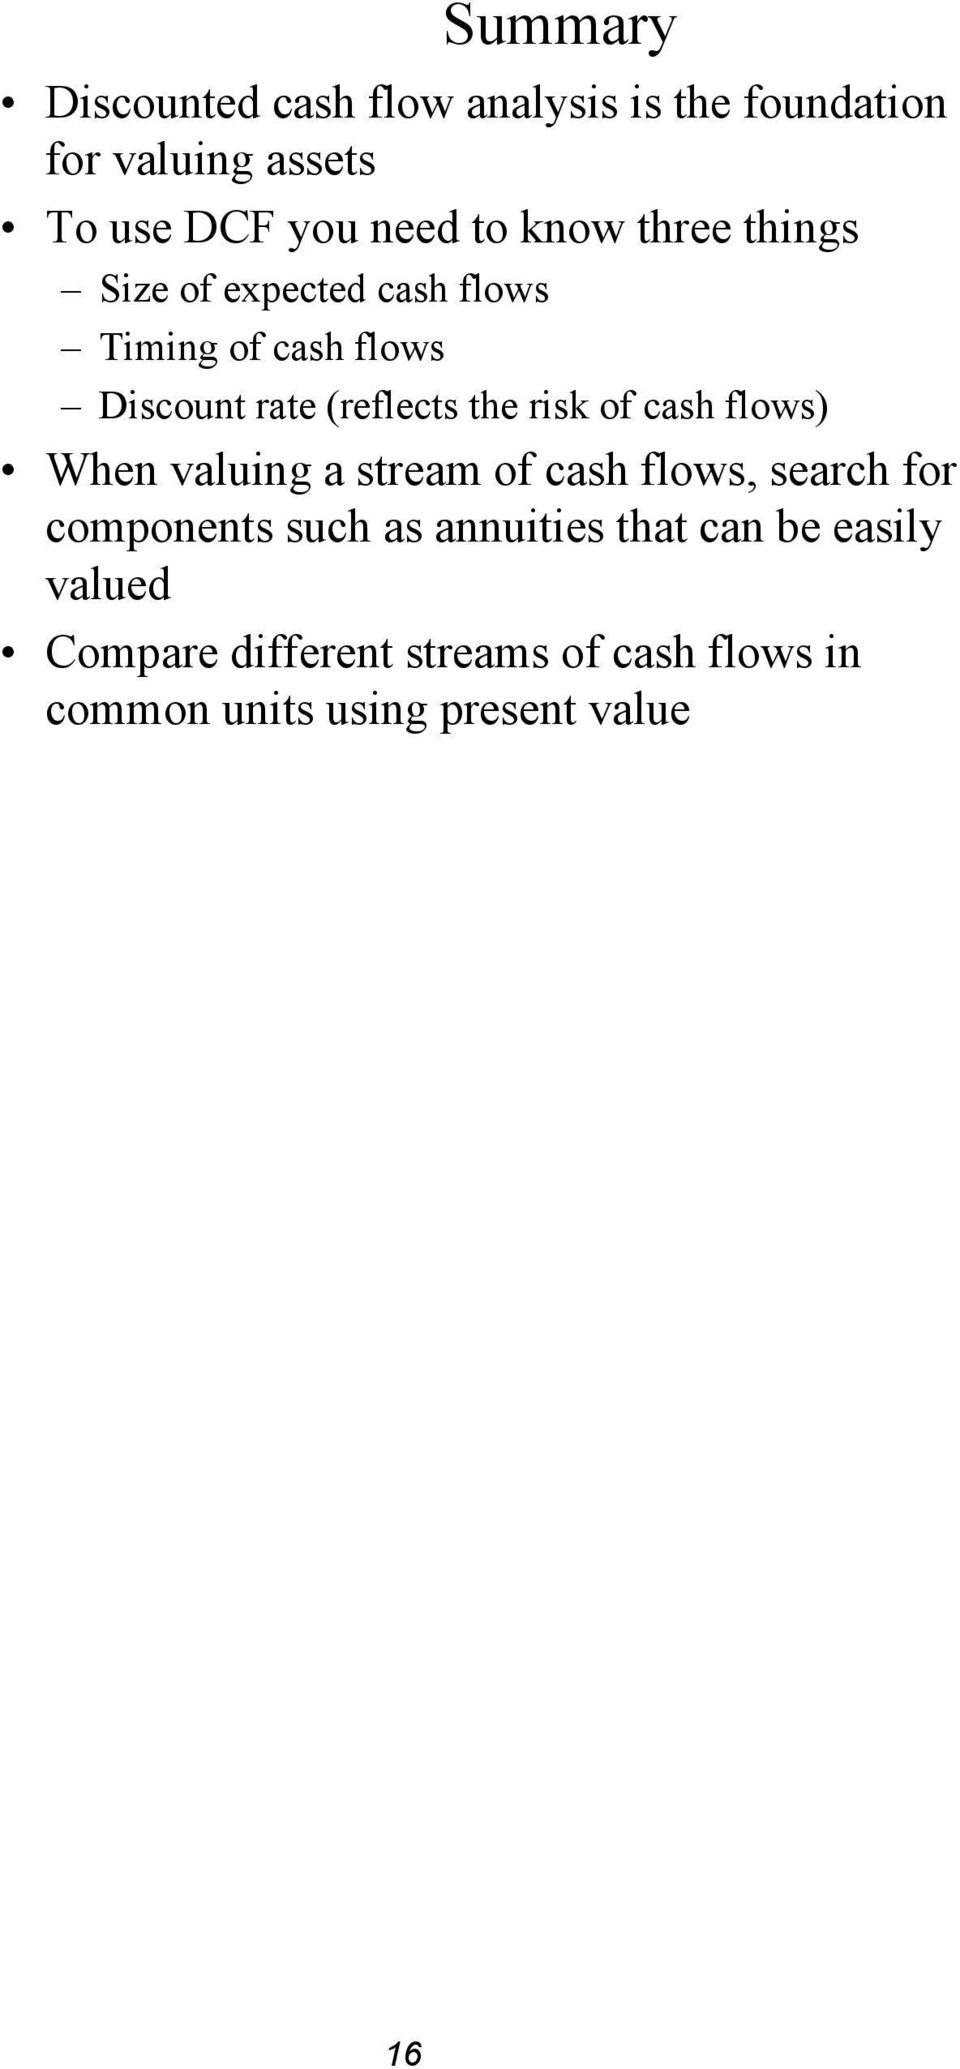 risk of cash flows) When valuing a stream of cash flows, search for components such as annuities